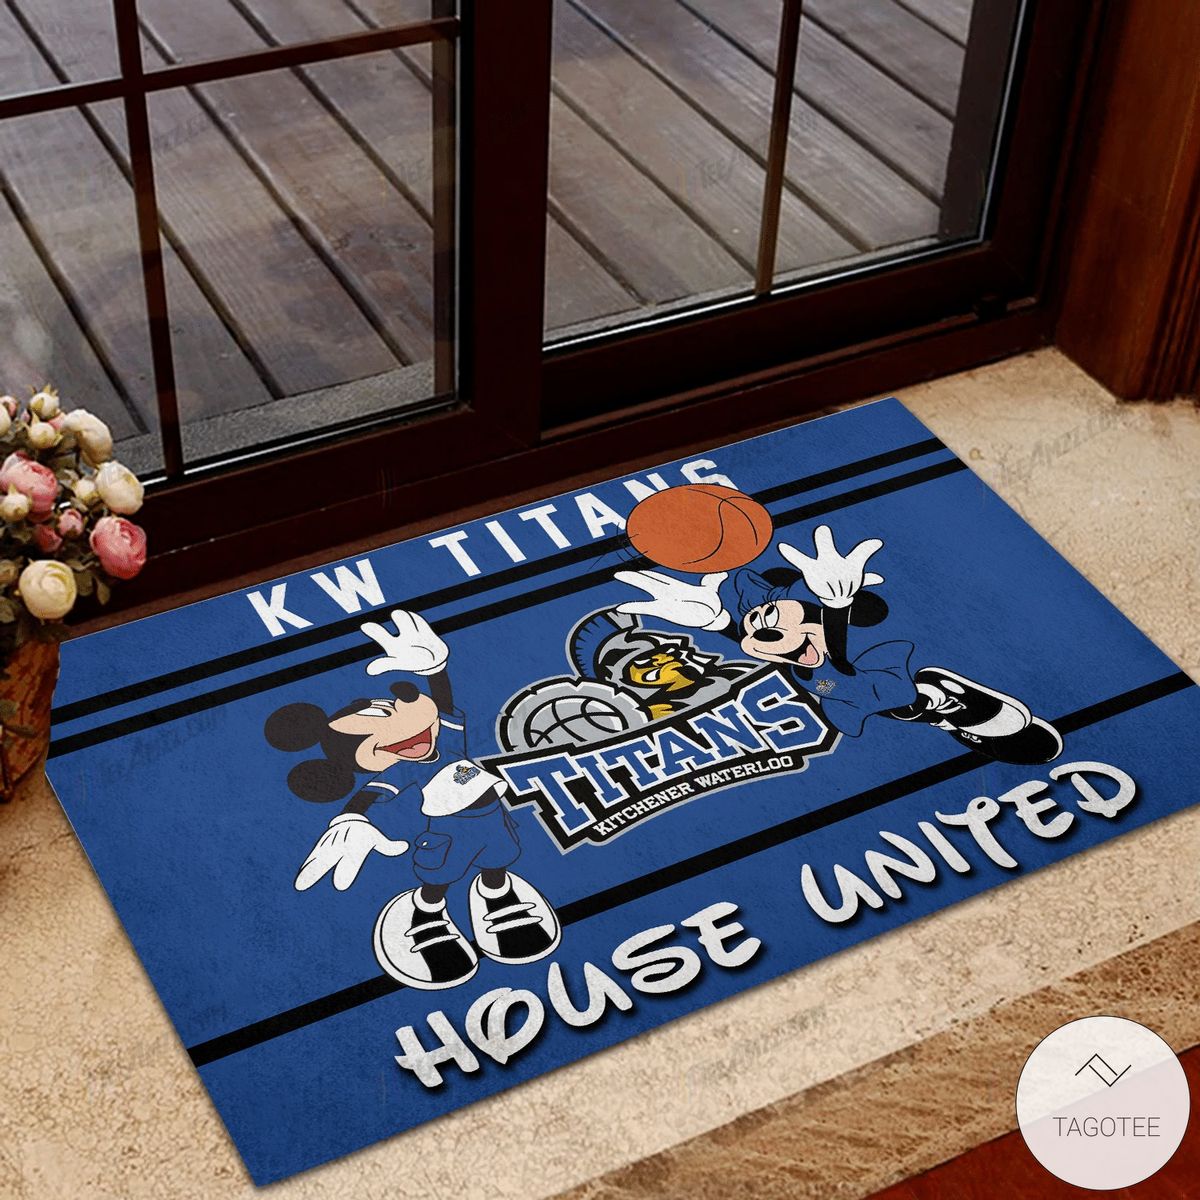 KW Titans Kitchener Waterloo House United Mickey Mouse And Minnie Mouse Doormat – TAGOTEE